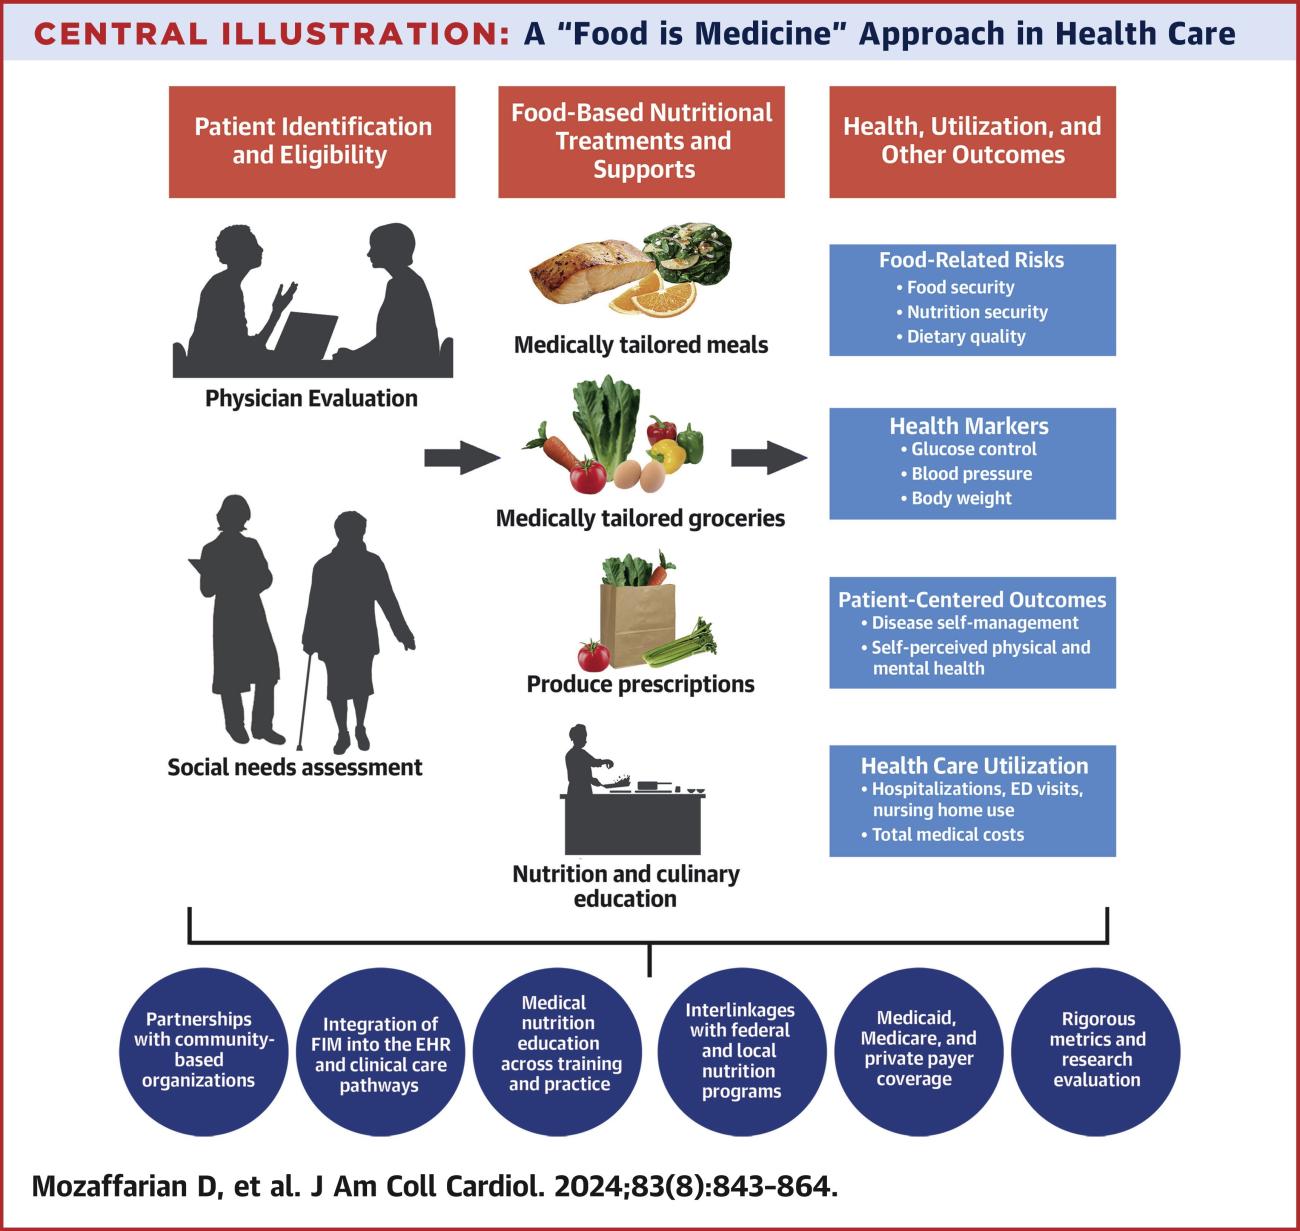 An image of a graph showing Food is Medicine interventions in health care.